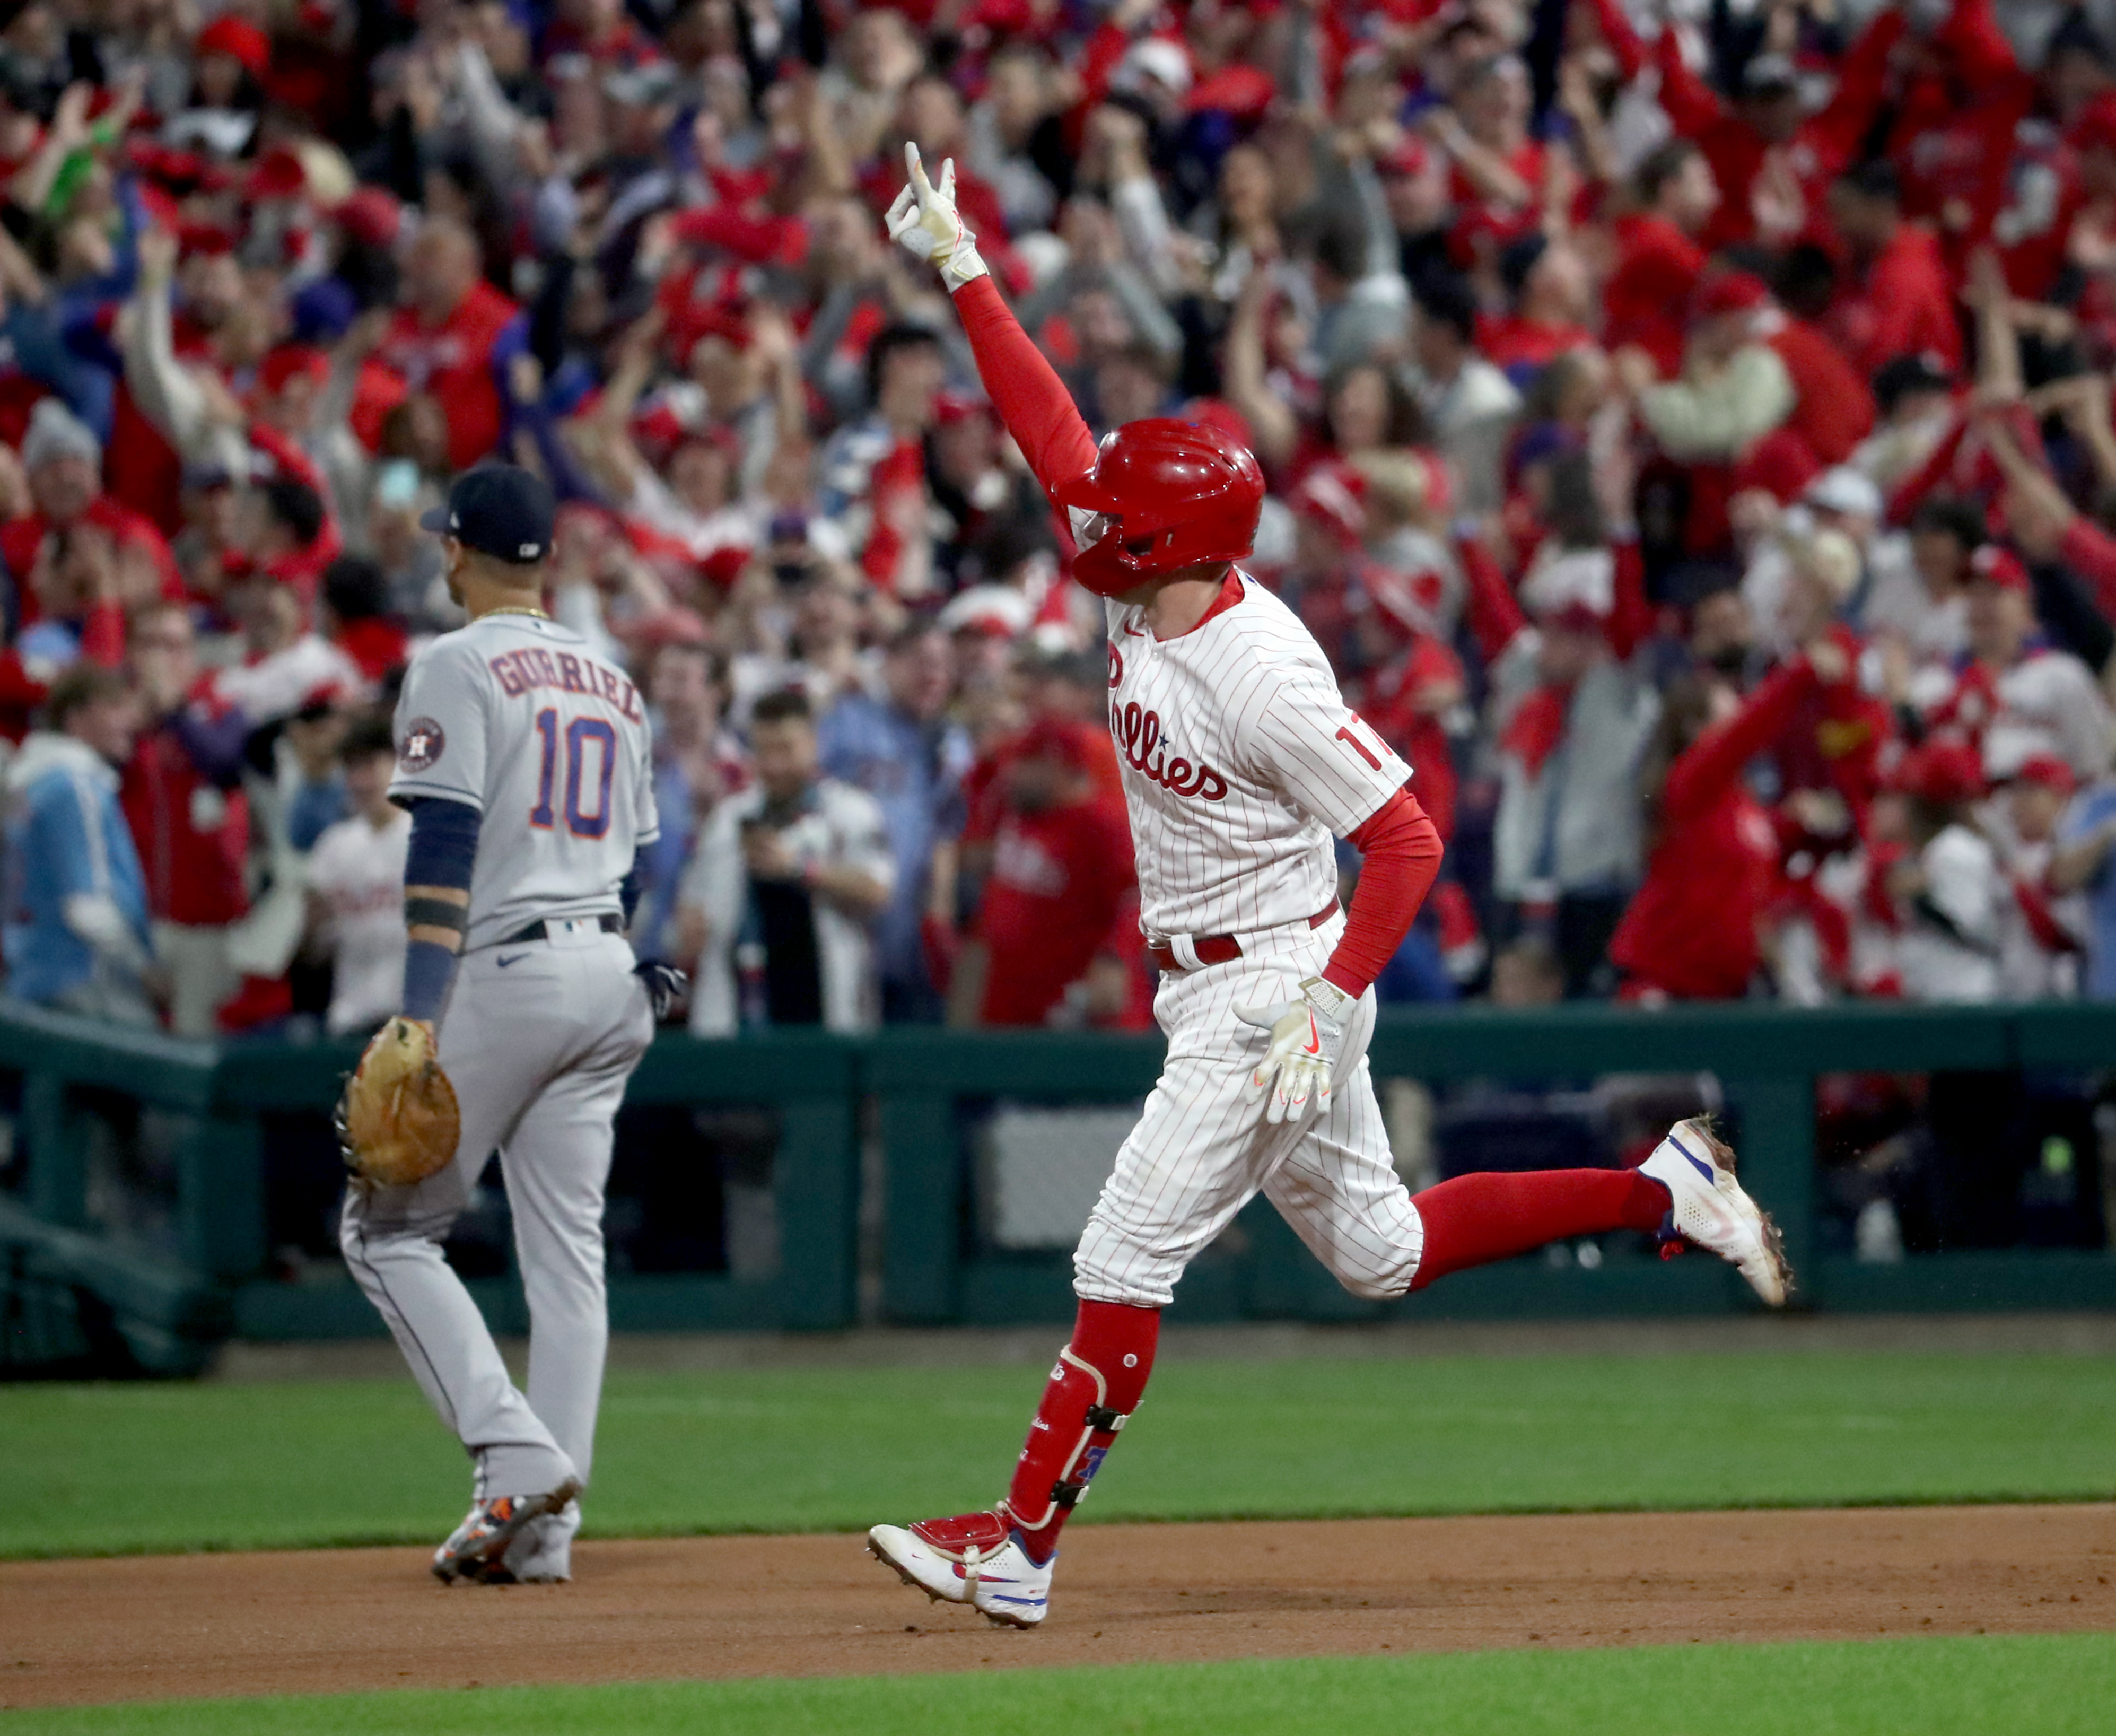 Rhys Hoskins (17) of the Philadelphia Phillies celebrates a home run in the fifth inning during World Series Game 3 against the Houston Astros at Citizens Bank Park, Tuesday, Nov. 1, 2022. The home run gave the Phillies a 7-0 lead.